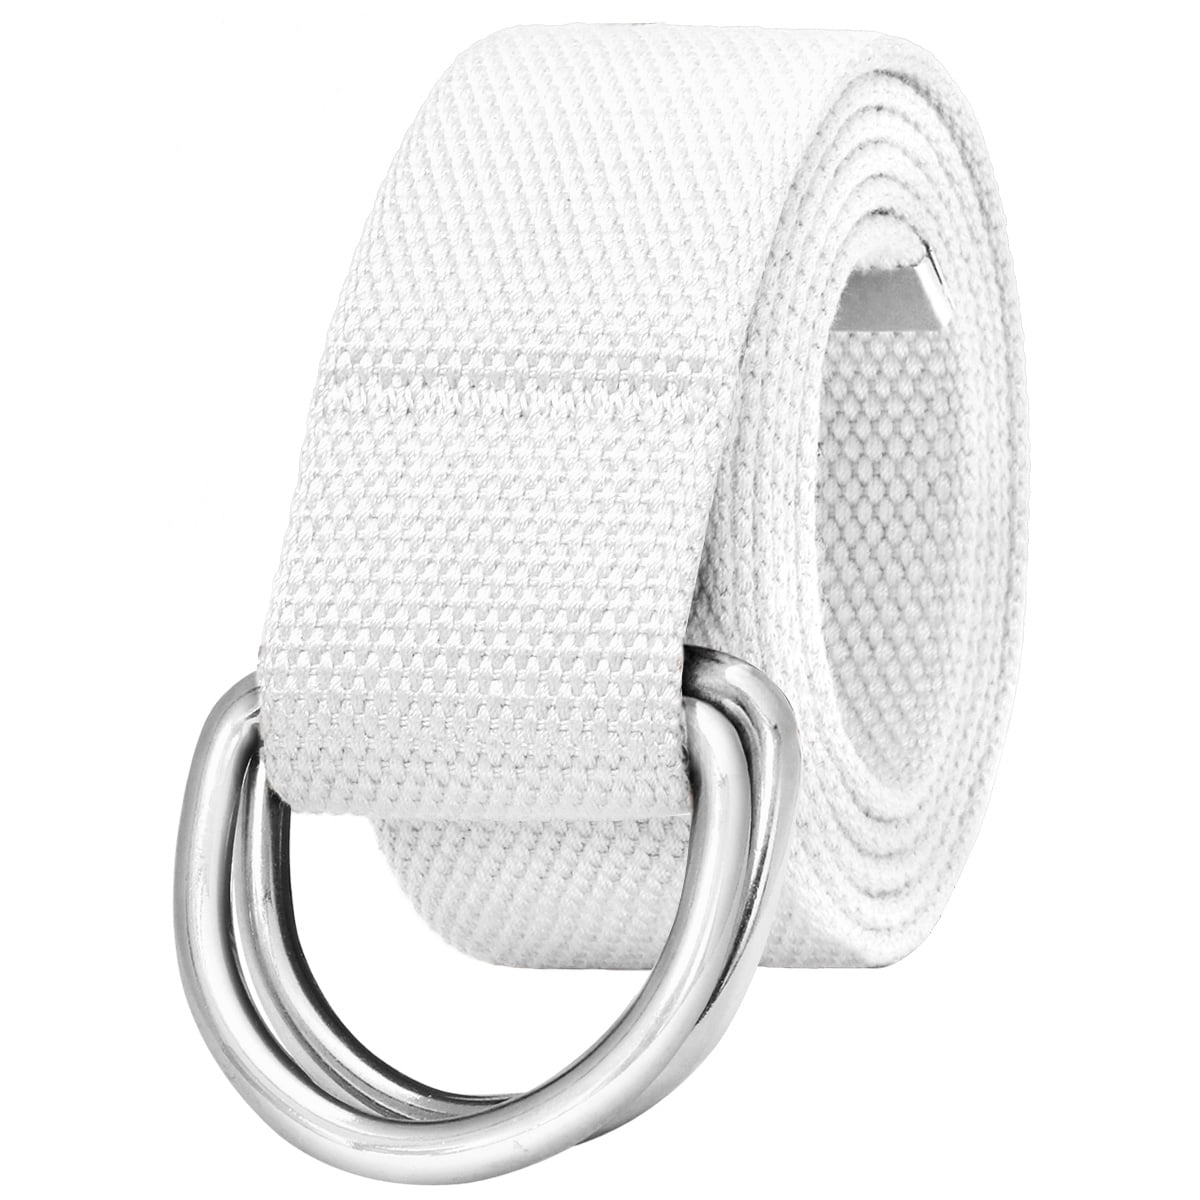 Falari Canvas Web Belt Metal Double D Ring Buckle for Men Women Casual  Cloth Military Style Belt 1 1/2 Wide White Medium 